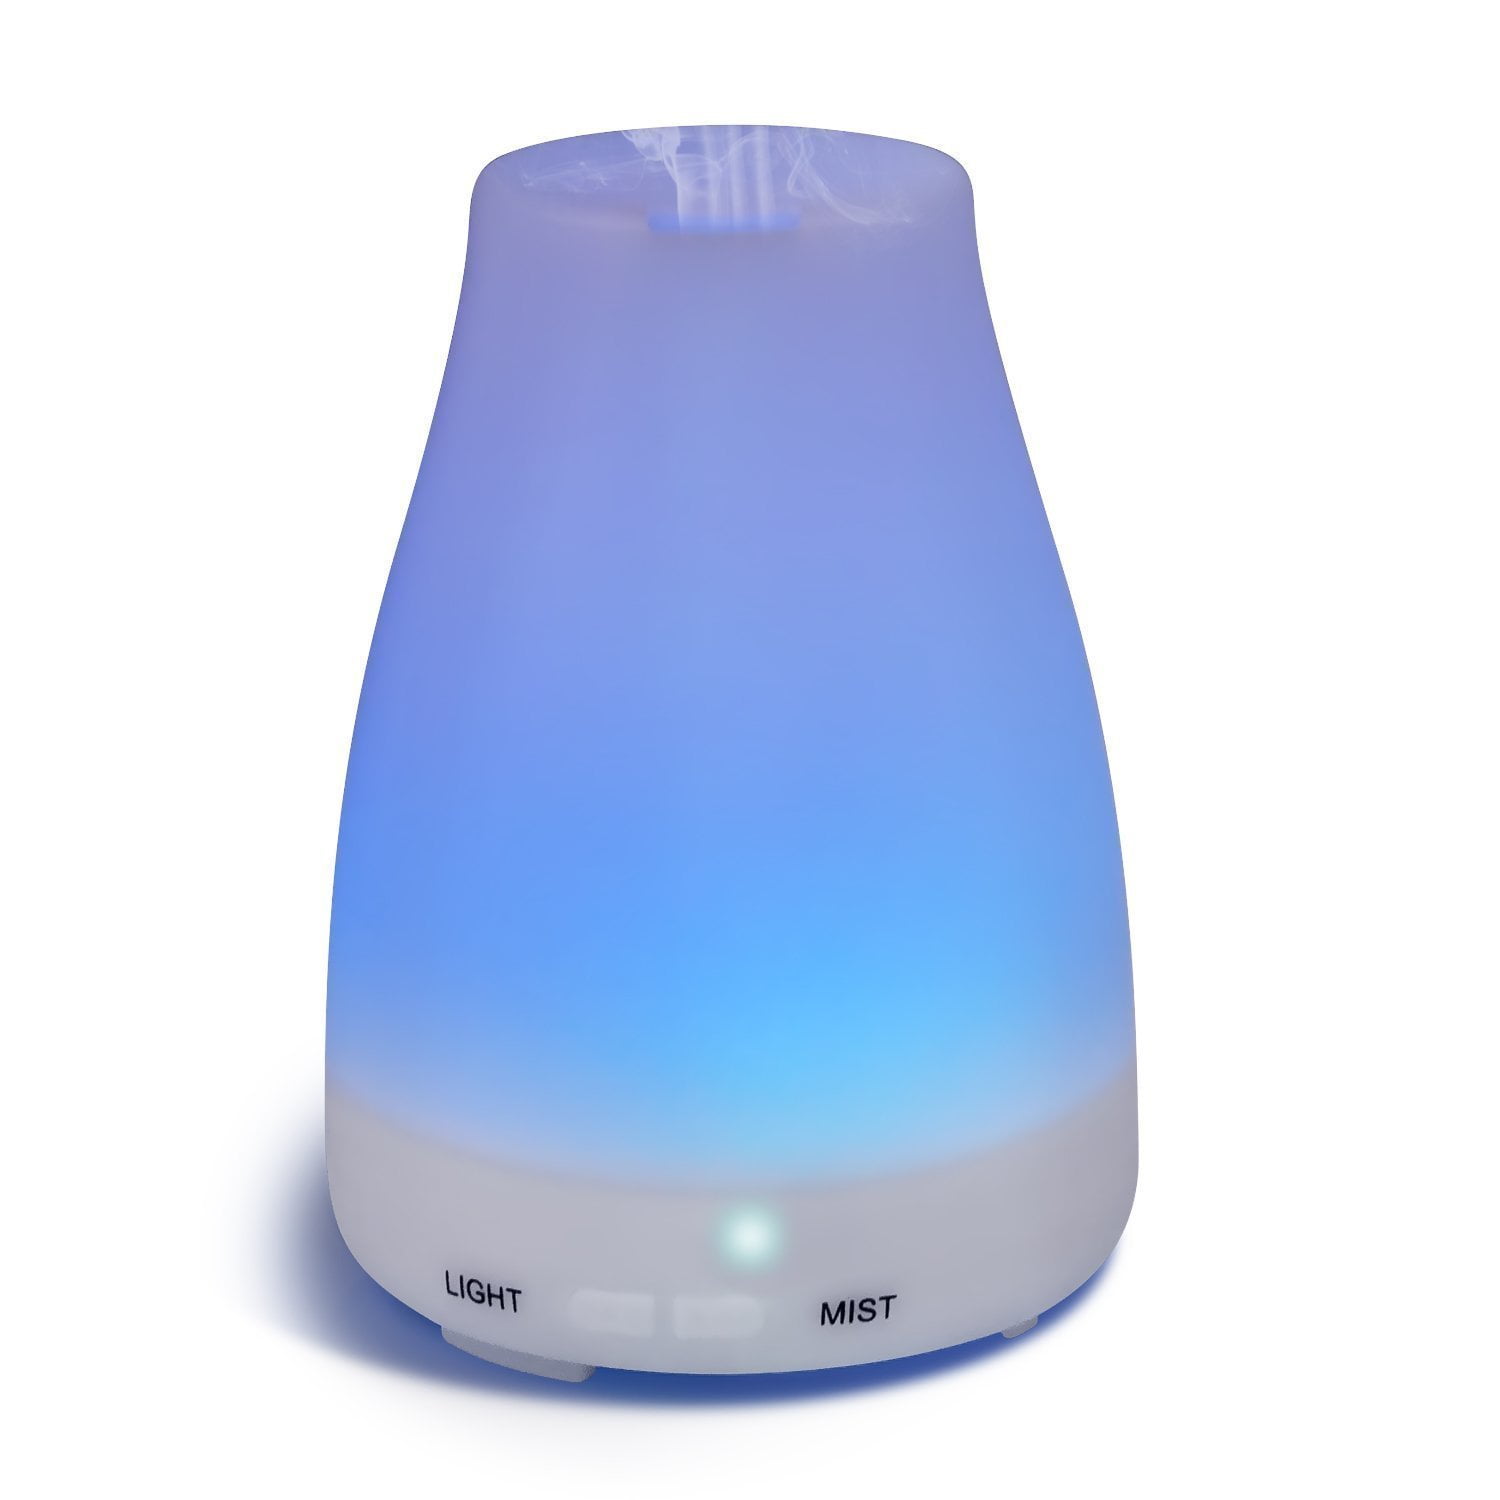 Diffusers,Homeweeks 100ml Colorful Essential Oil Diffuser with